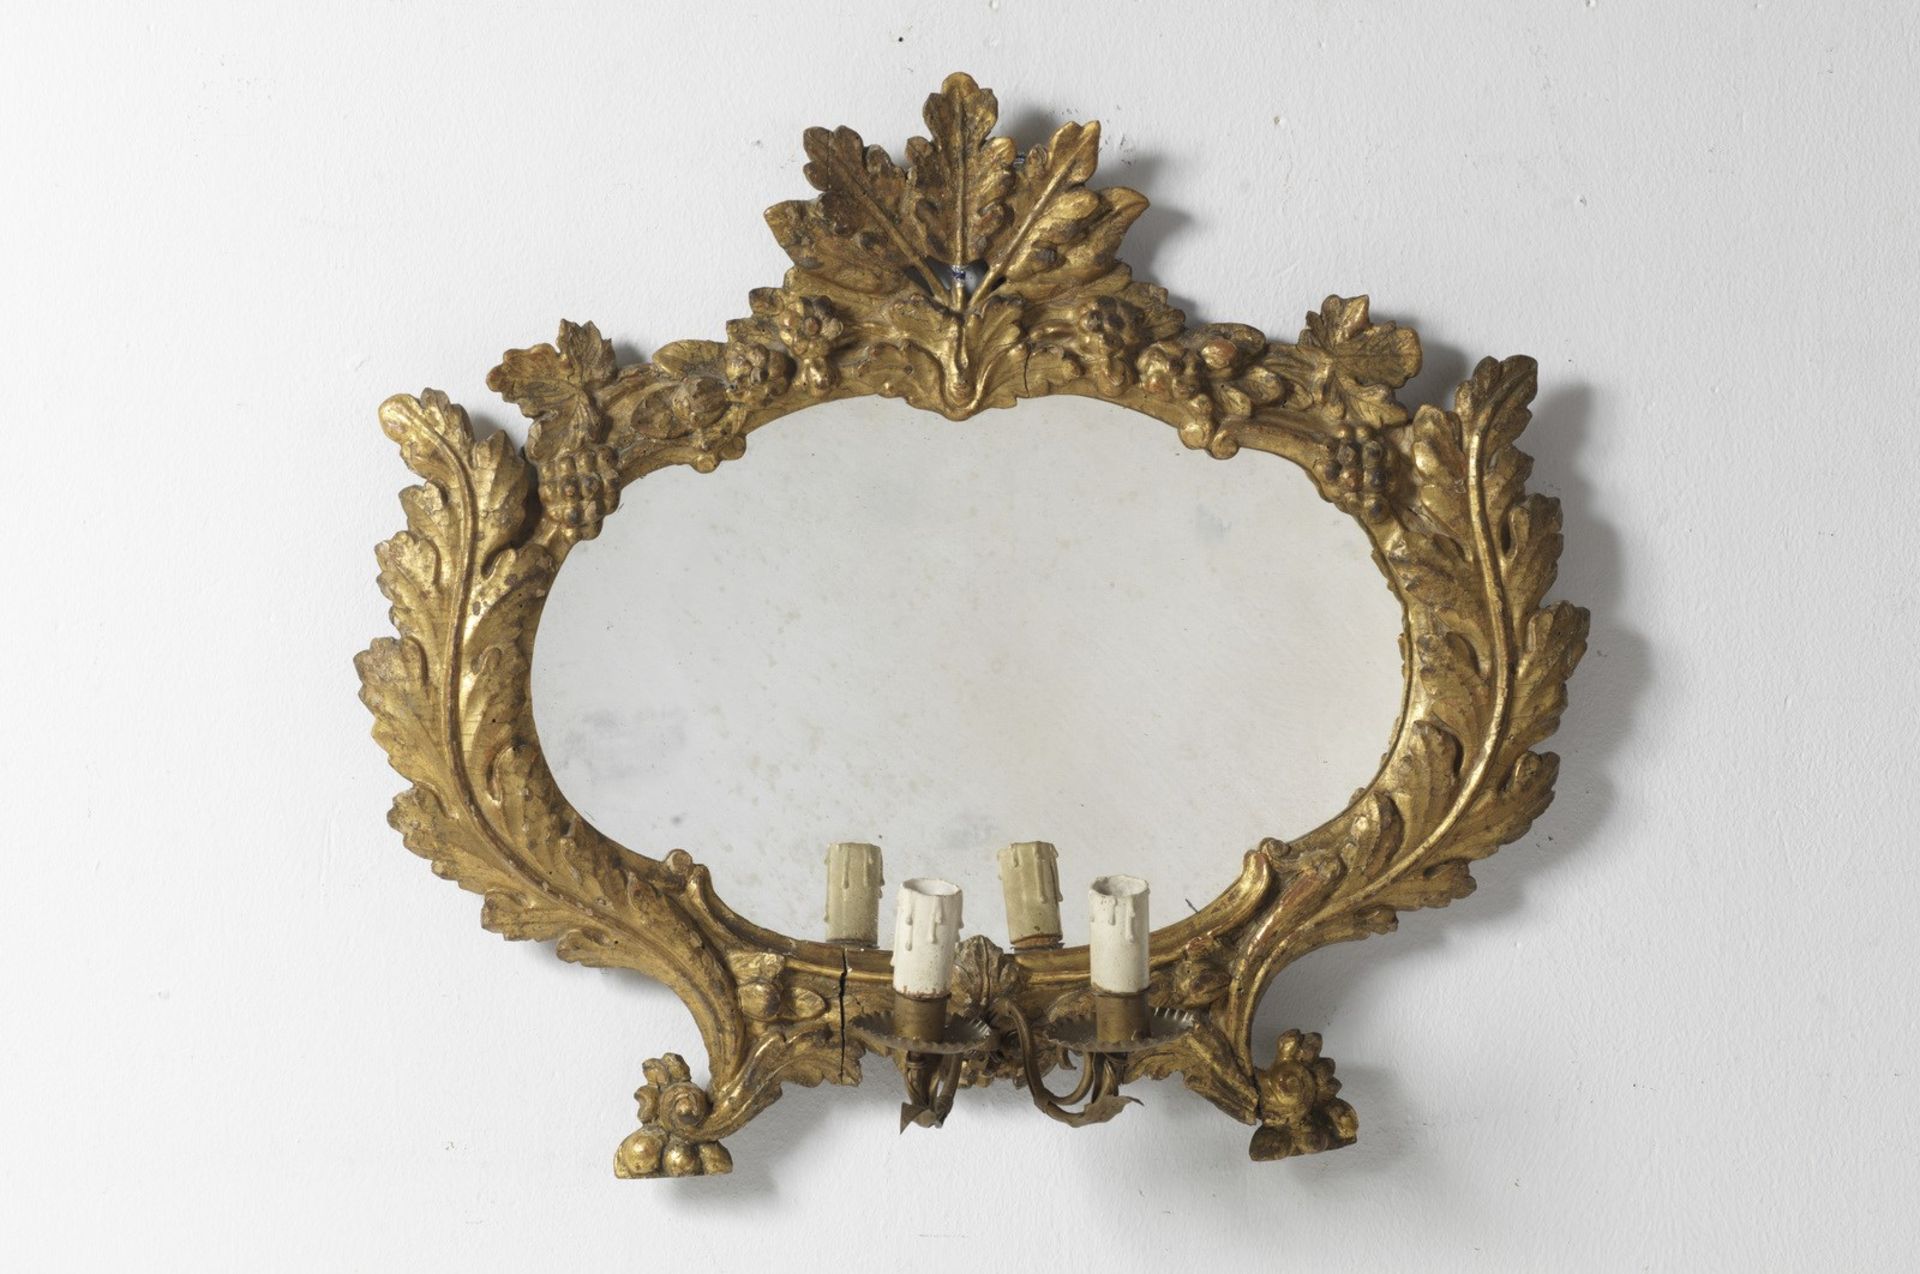 MANIFATTURA ITALIANA DEL XVIII SECOLO Group of three carved and gilded mirrors with leafy motif. - Bild 2 aus 5